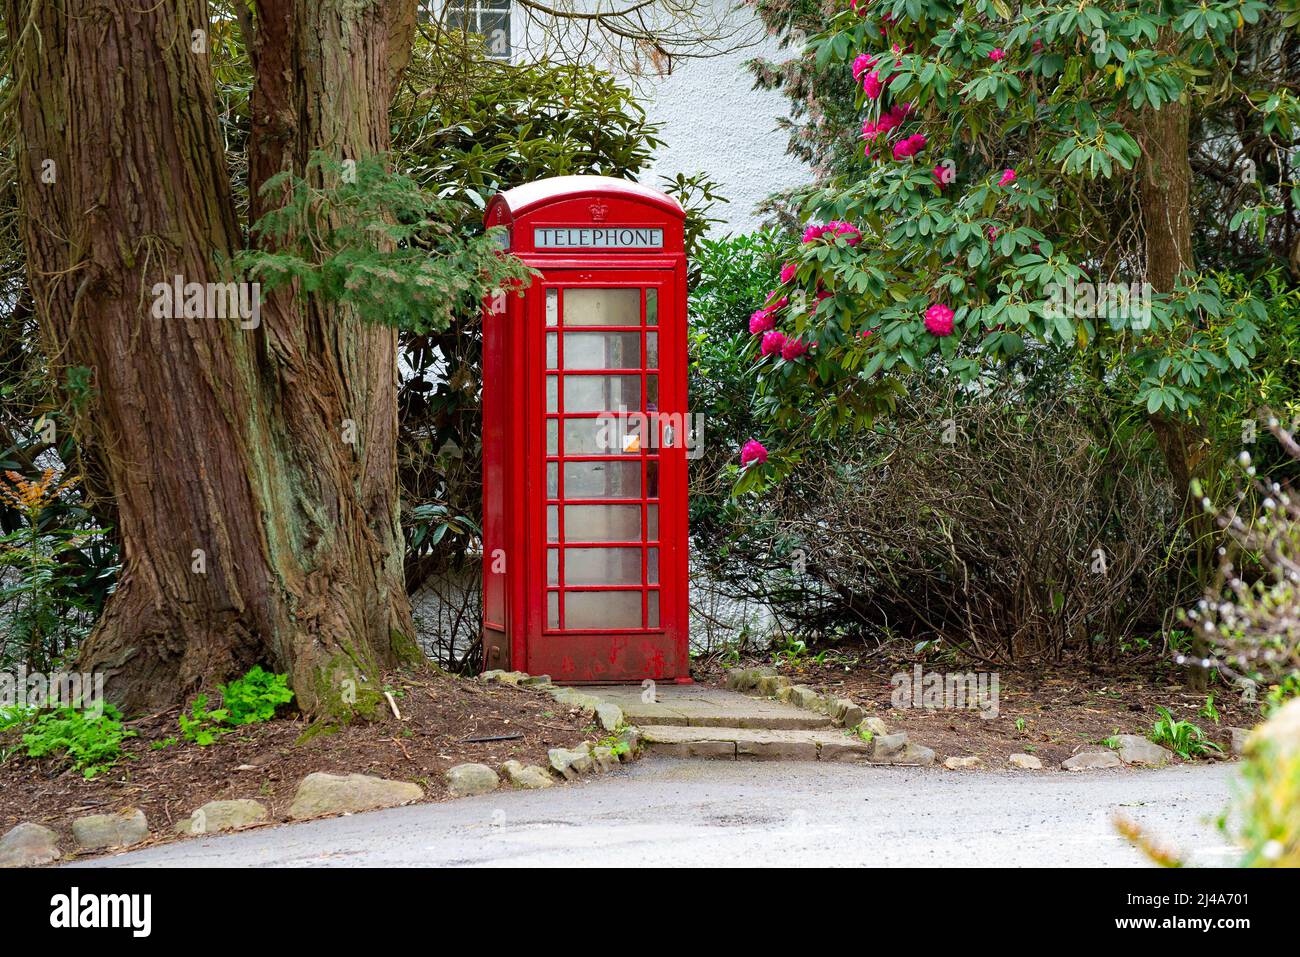 A red telephone box and flowers, Windermere, the Lake District, Cumbria, UK. Stock Photo